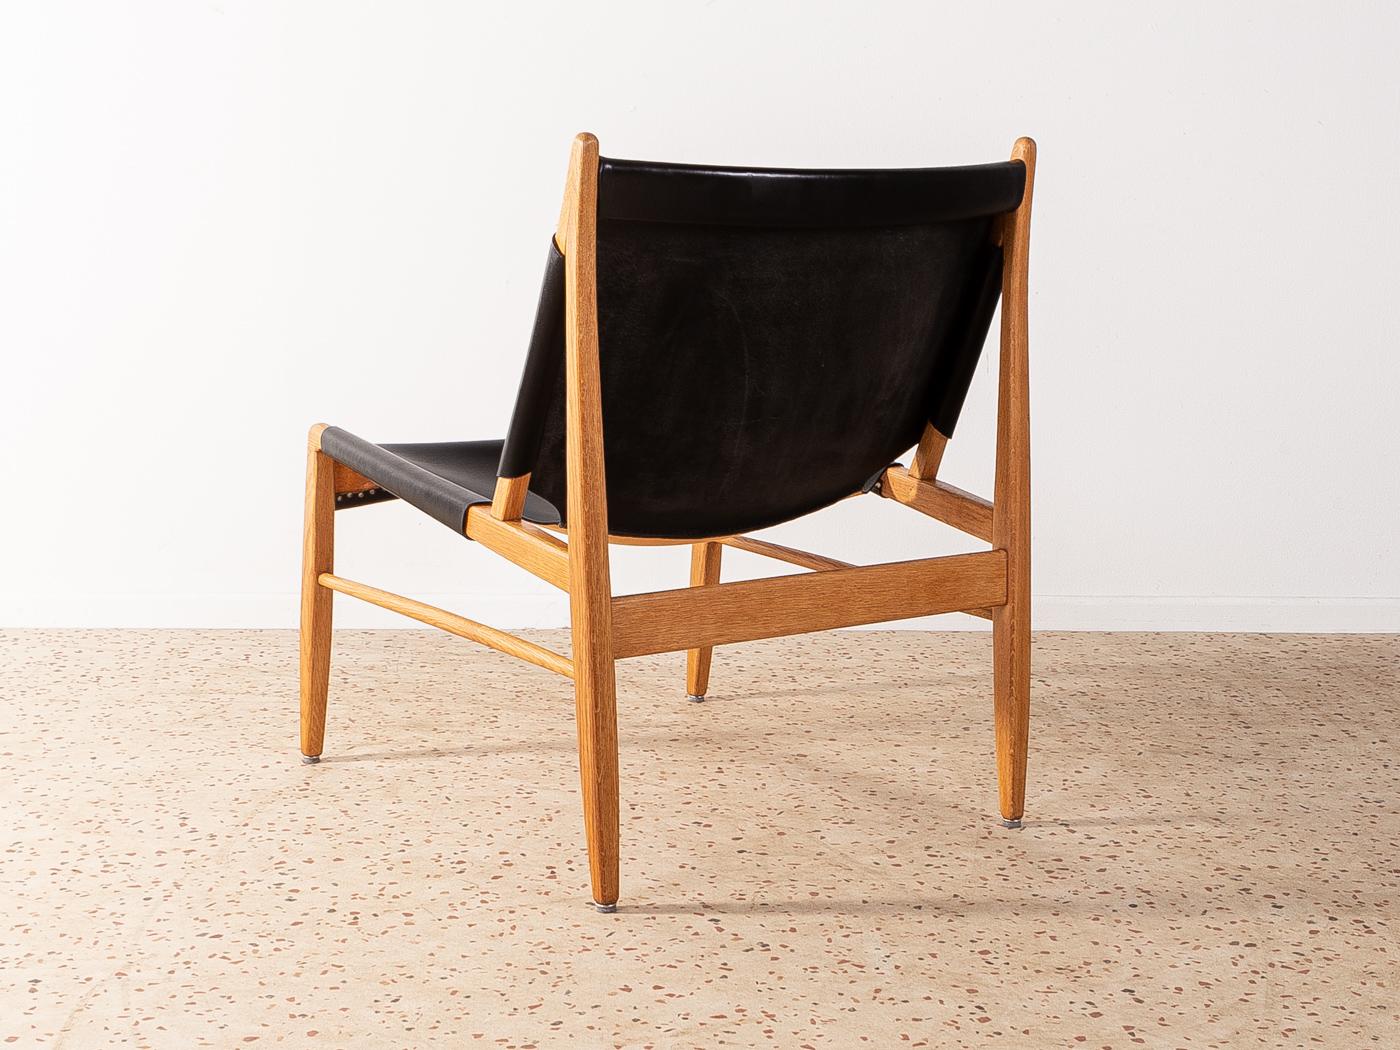 Wonderful armchair, model 1192, by Franz Xaver Lutz for WK Möbel from 1958. Solid oak frame with original leather covers in black.

Quality Features:
 accomplished design: perfect proportions and visible attention to detail
 high-quality